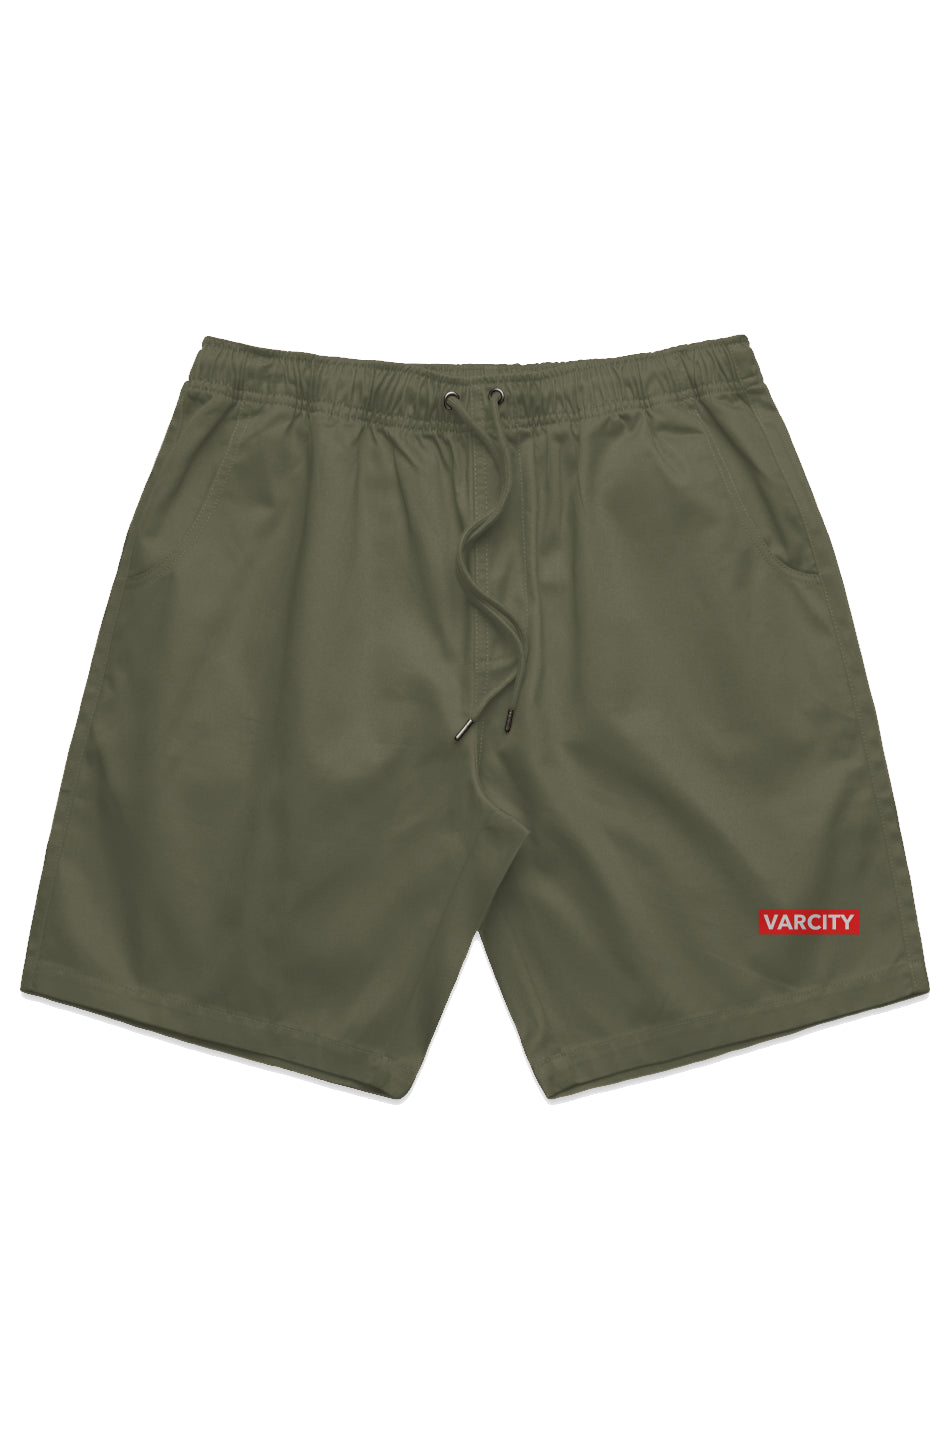 Classic Varcity ® Foundations Shorts Cypress